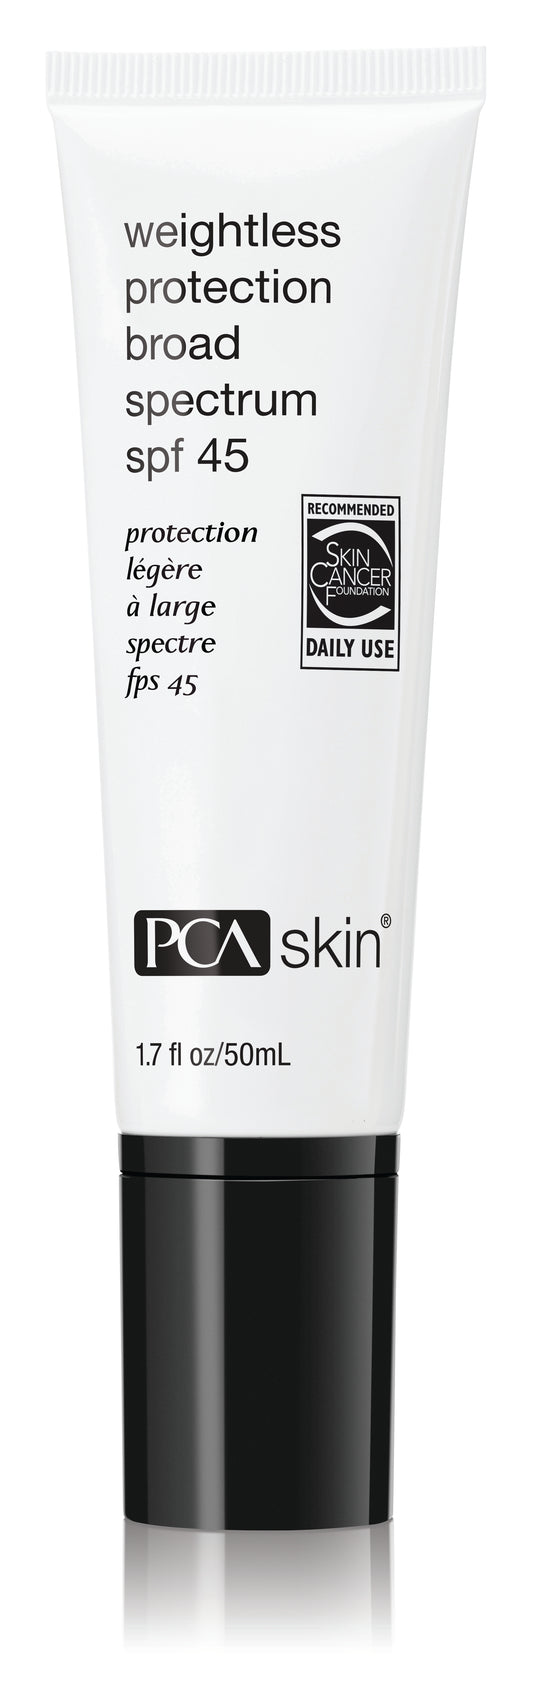 Weightless Protection SPF 45